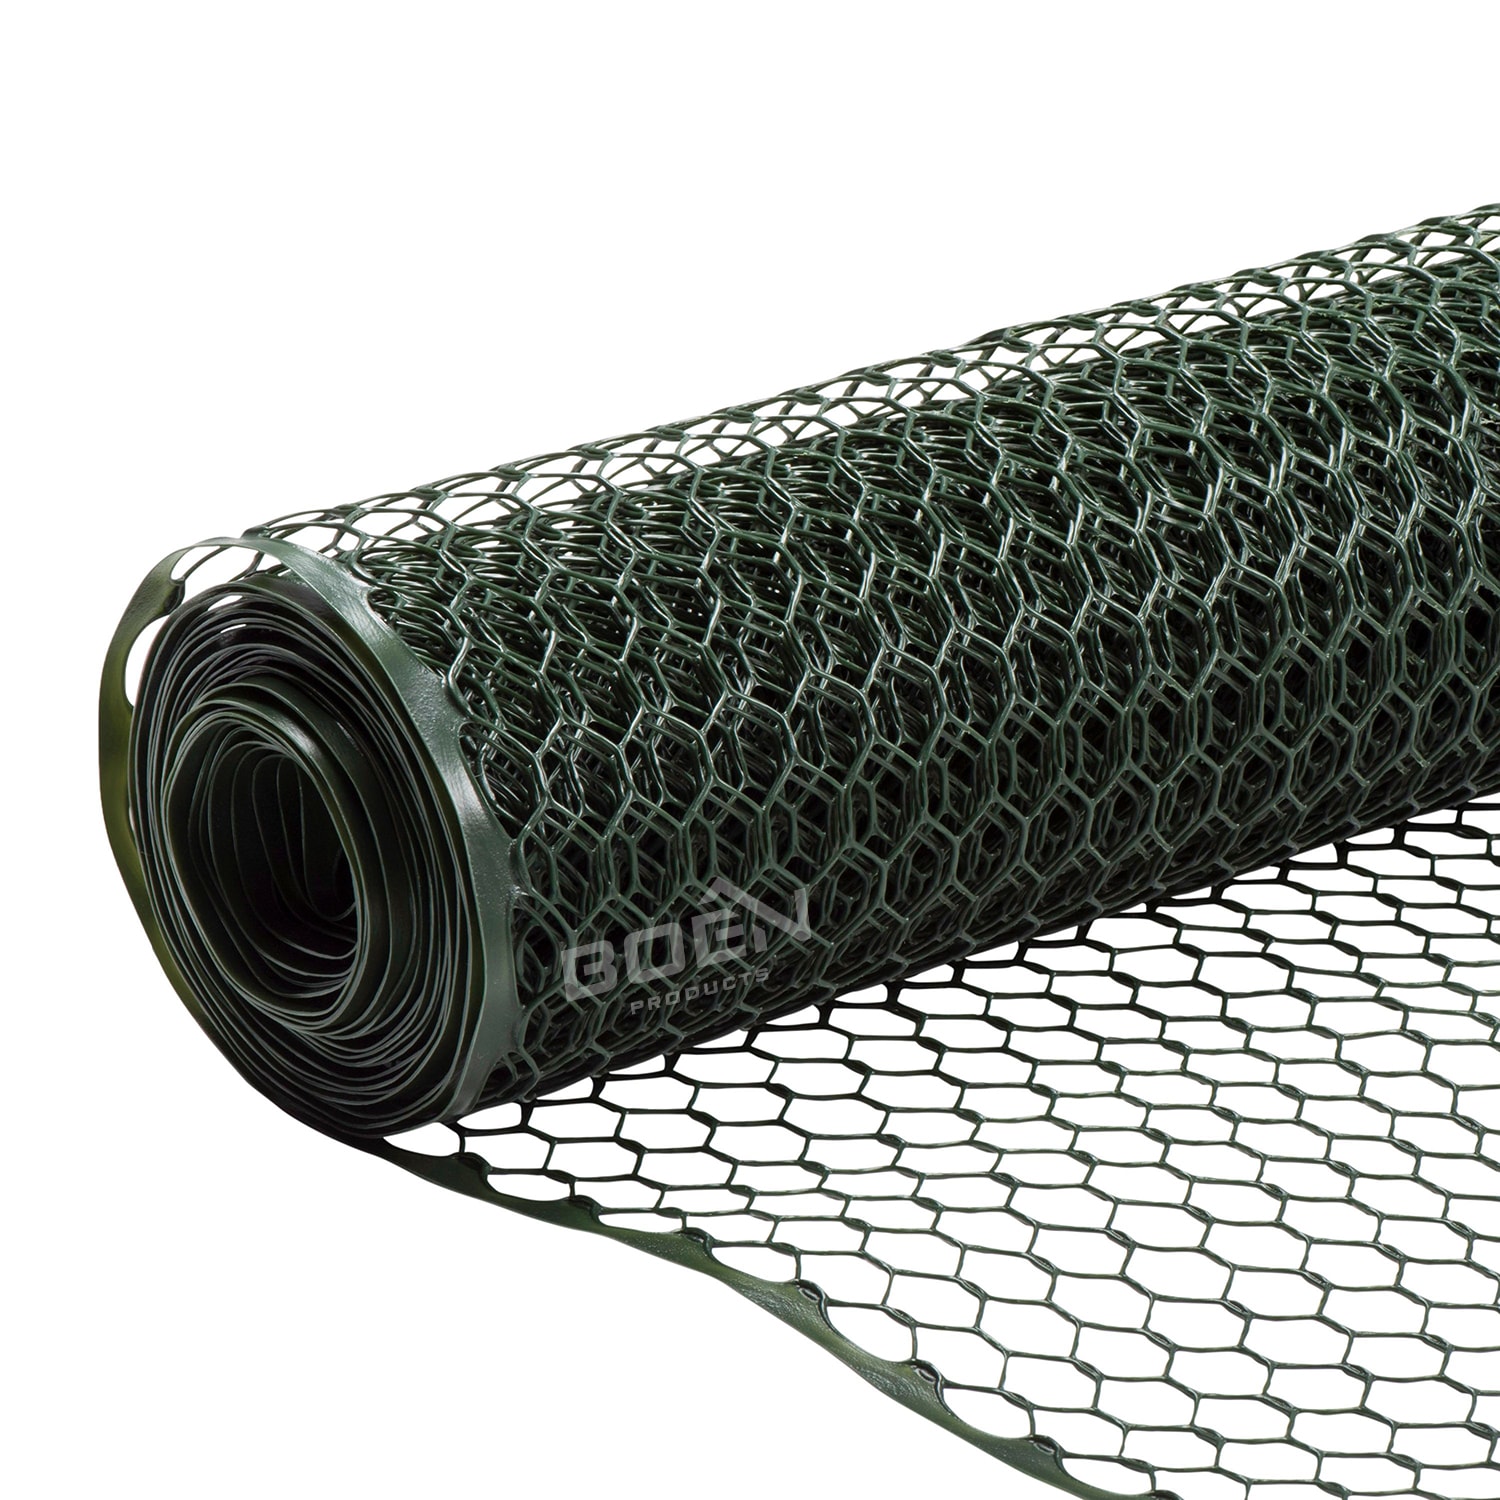 15.7 Inch X 10FT Plastic Chicken Fence Mesh,Hexagonal Fencing Wire for ,  Poultry, Chicken Wire Black 